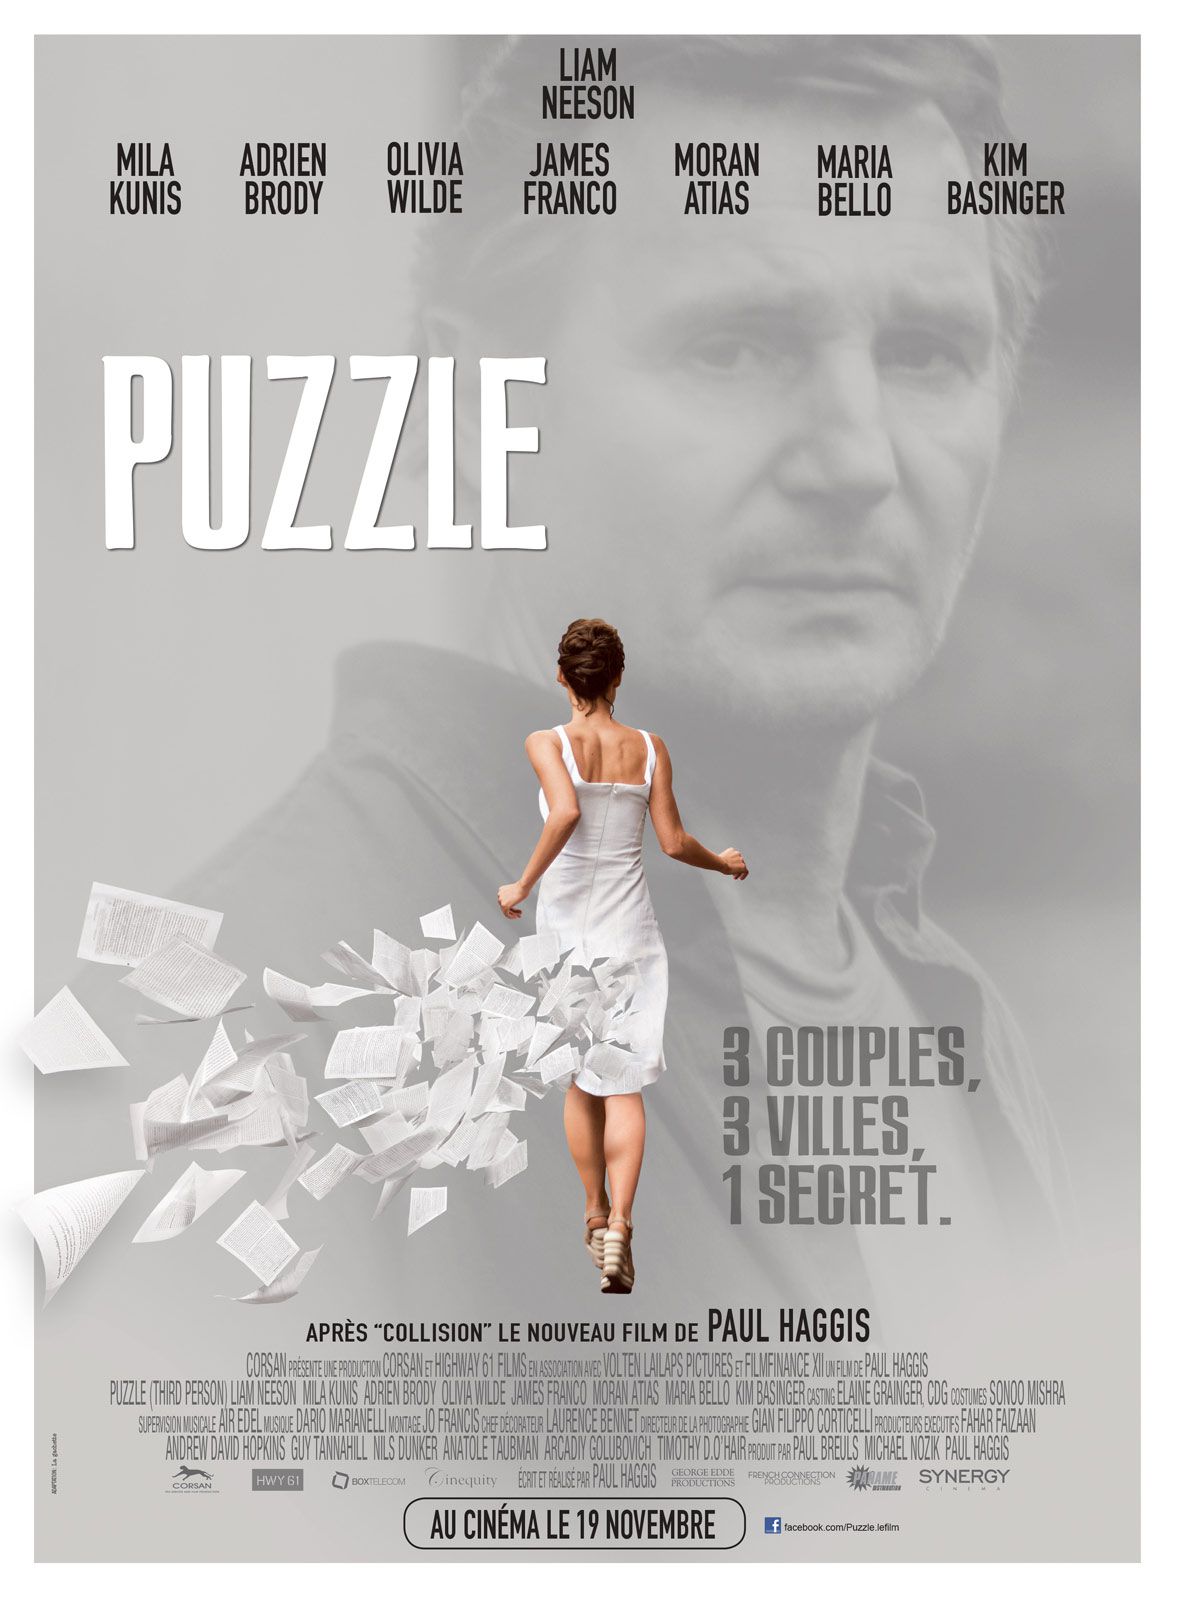 Puzzle - Film (2013) streaming VF gratuit complet